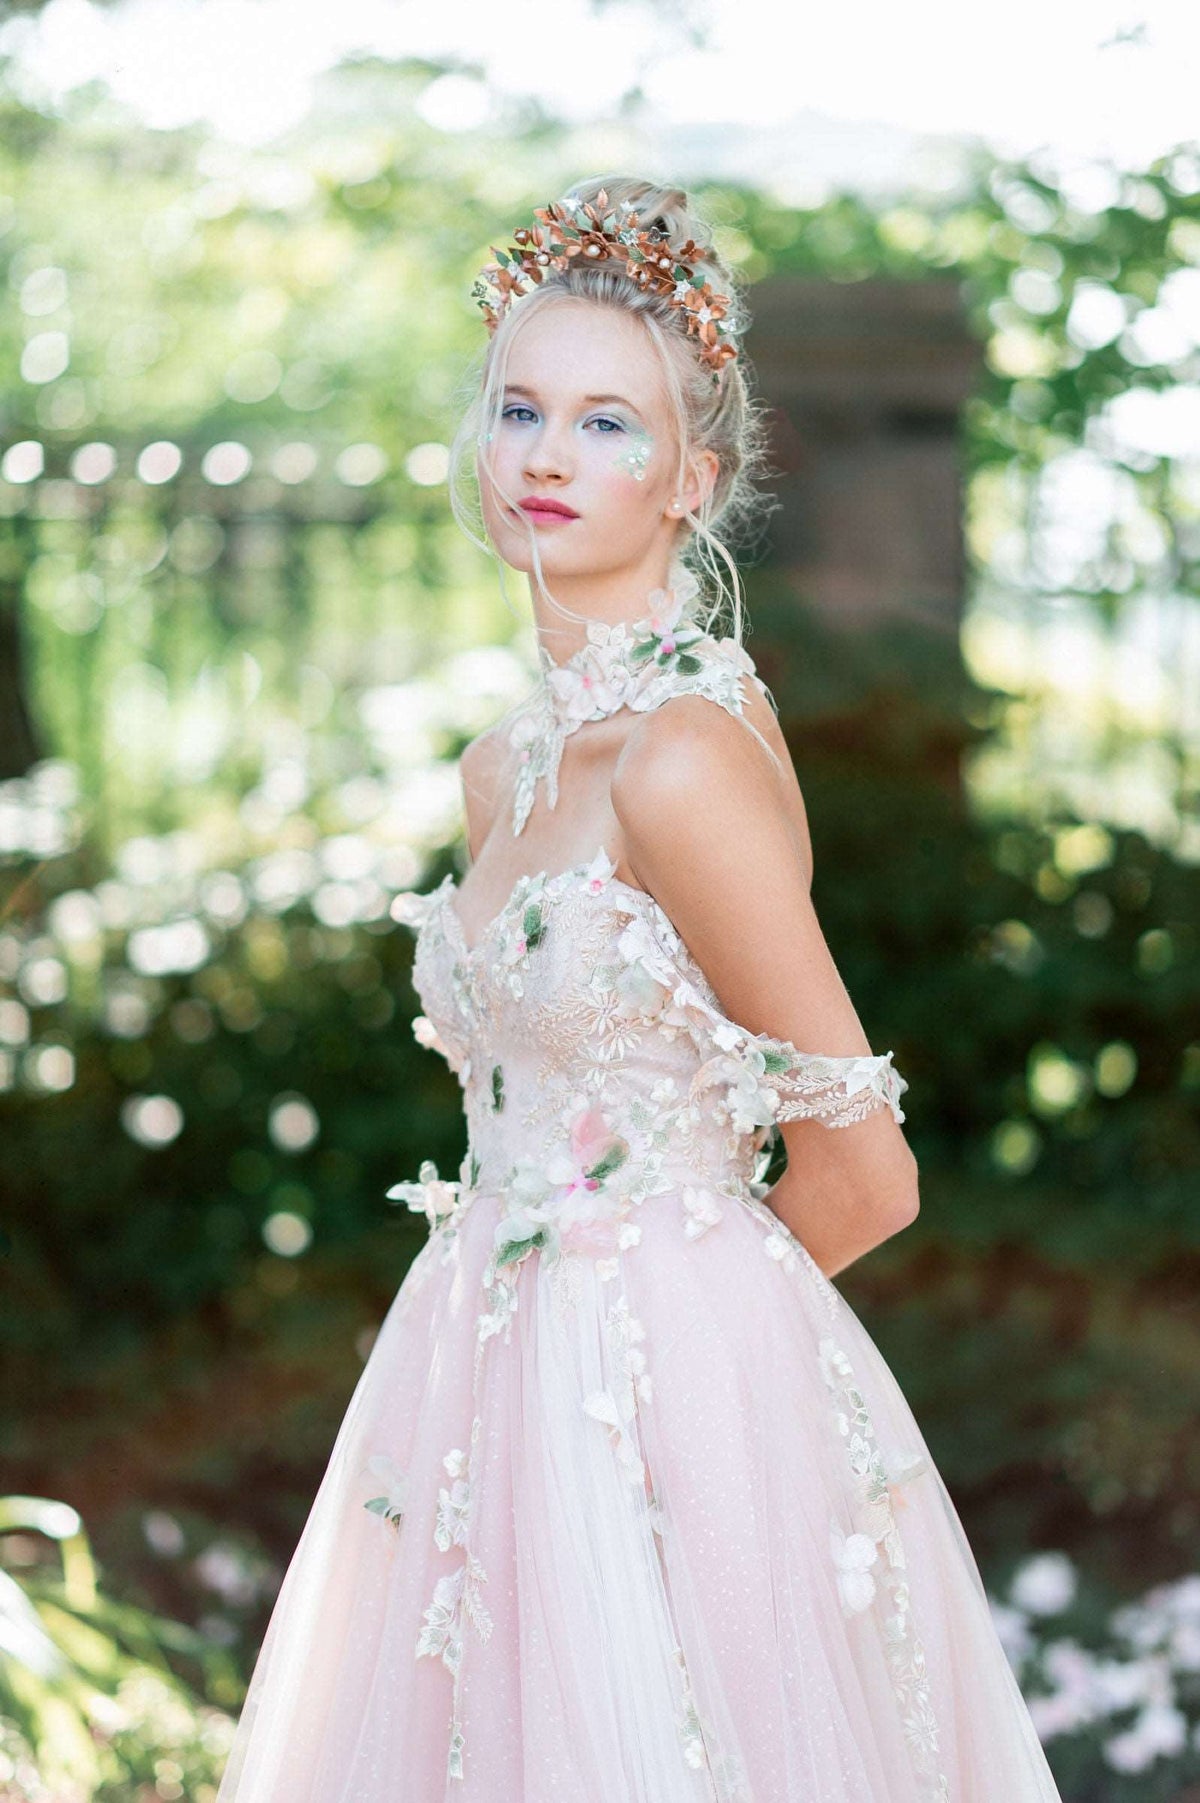 The most romantic and whimsical couture fairytale wedding dress. Whimsical fairy core inspired pink wedding dress for unconventionally cool brides. Catherine Langlois, Toronto, Canada